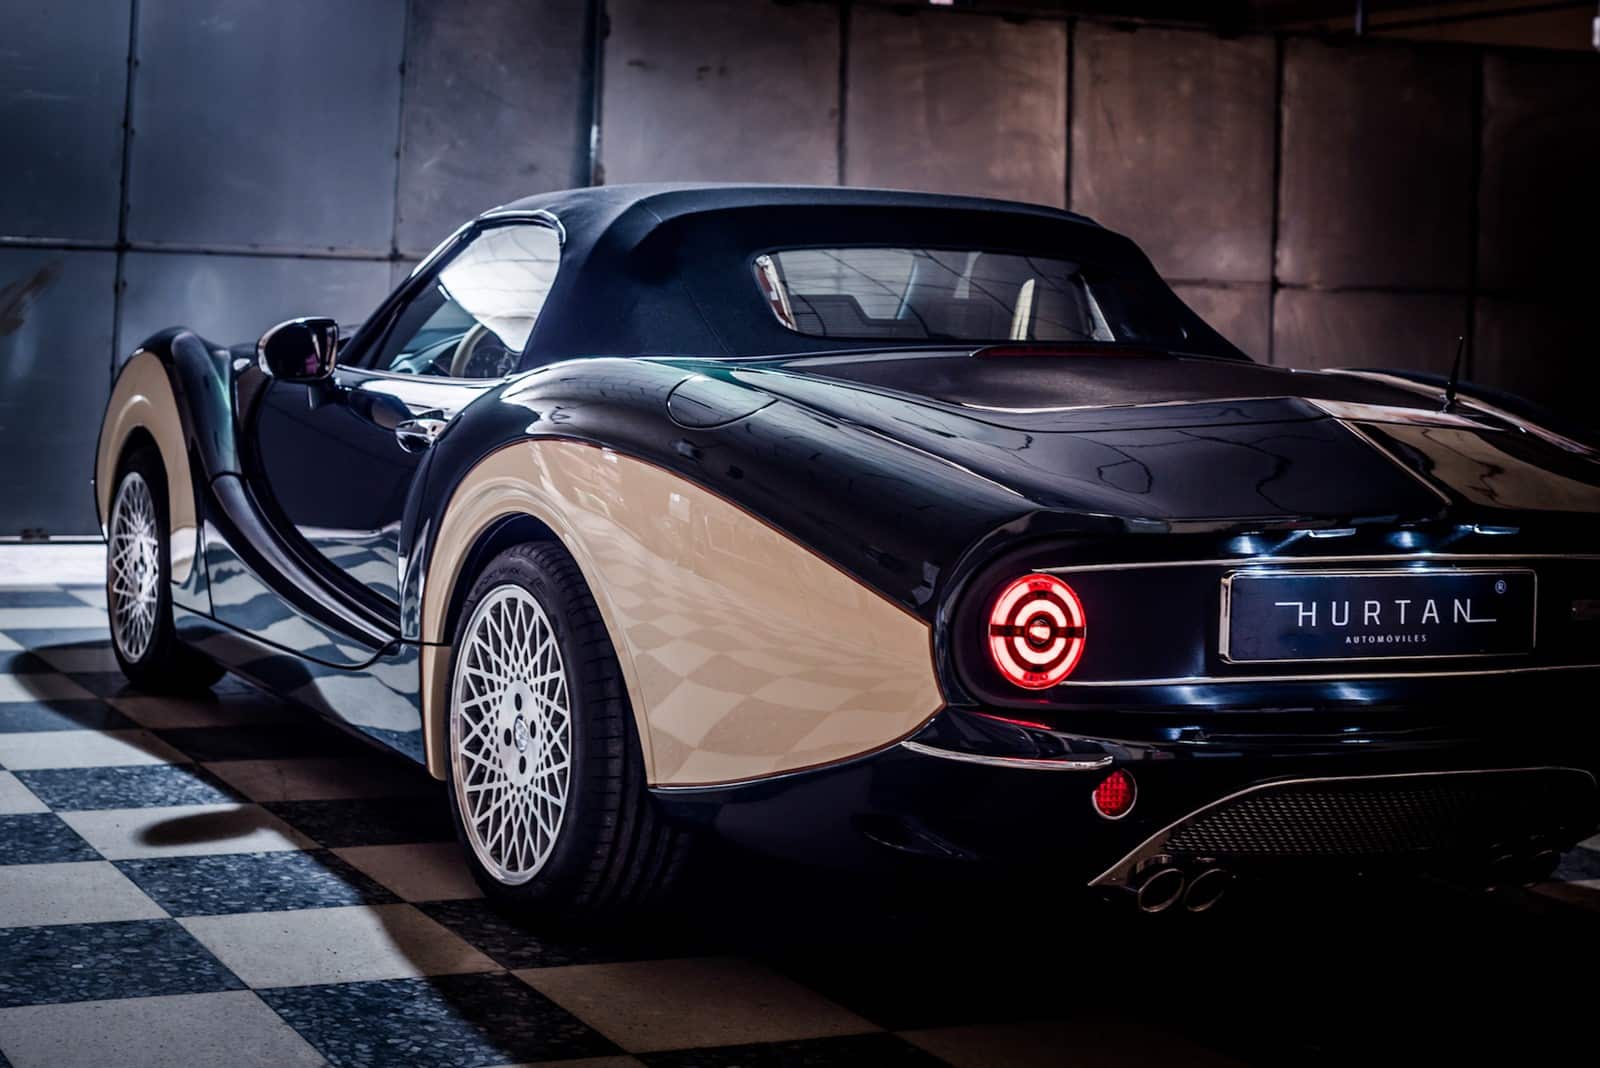 Hurtan Grand Albaycín, when a Mazda MX-5 ND "dresses up" and the Spanish